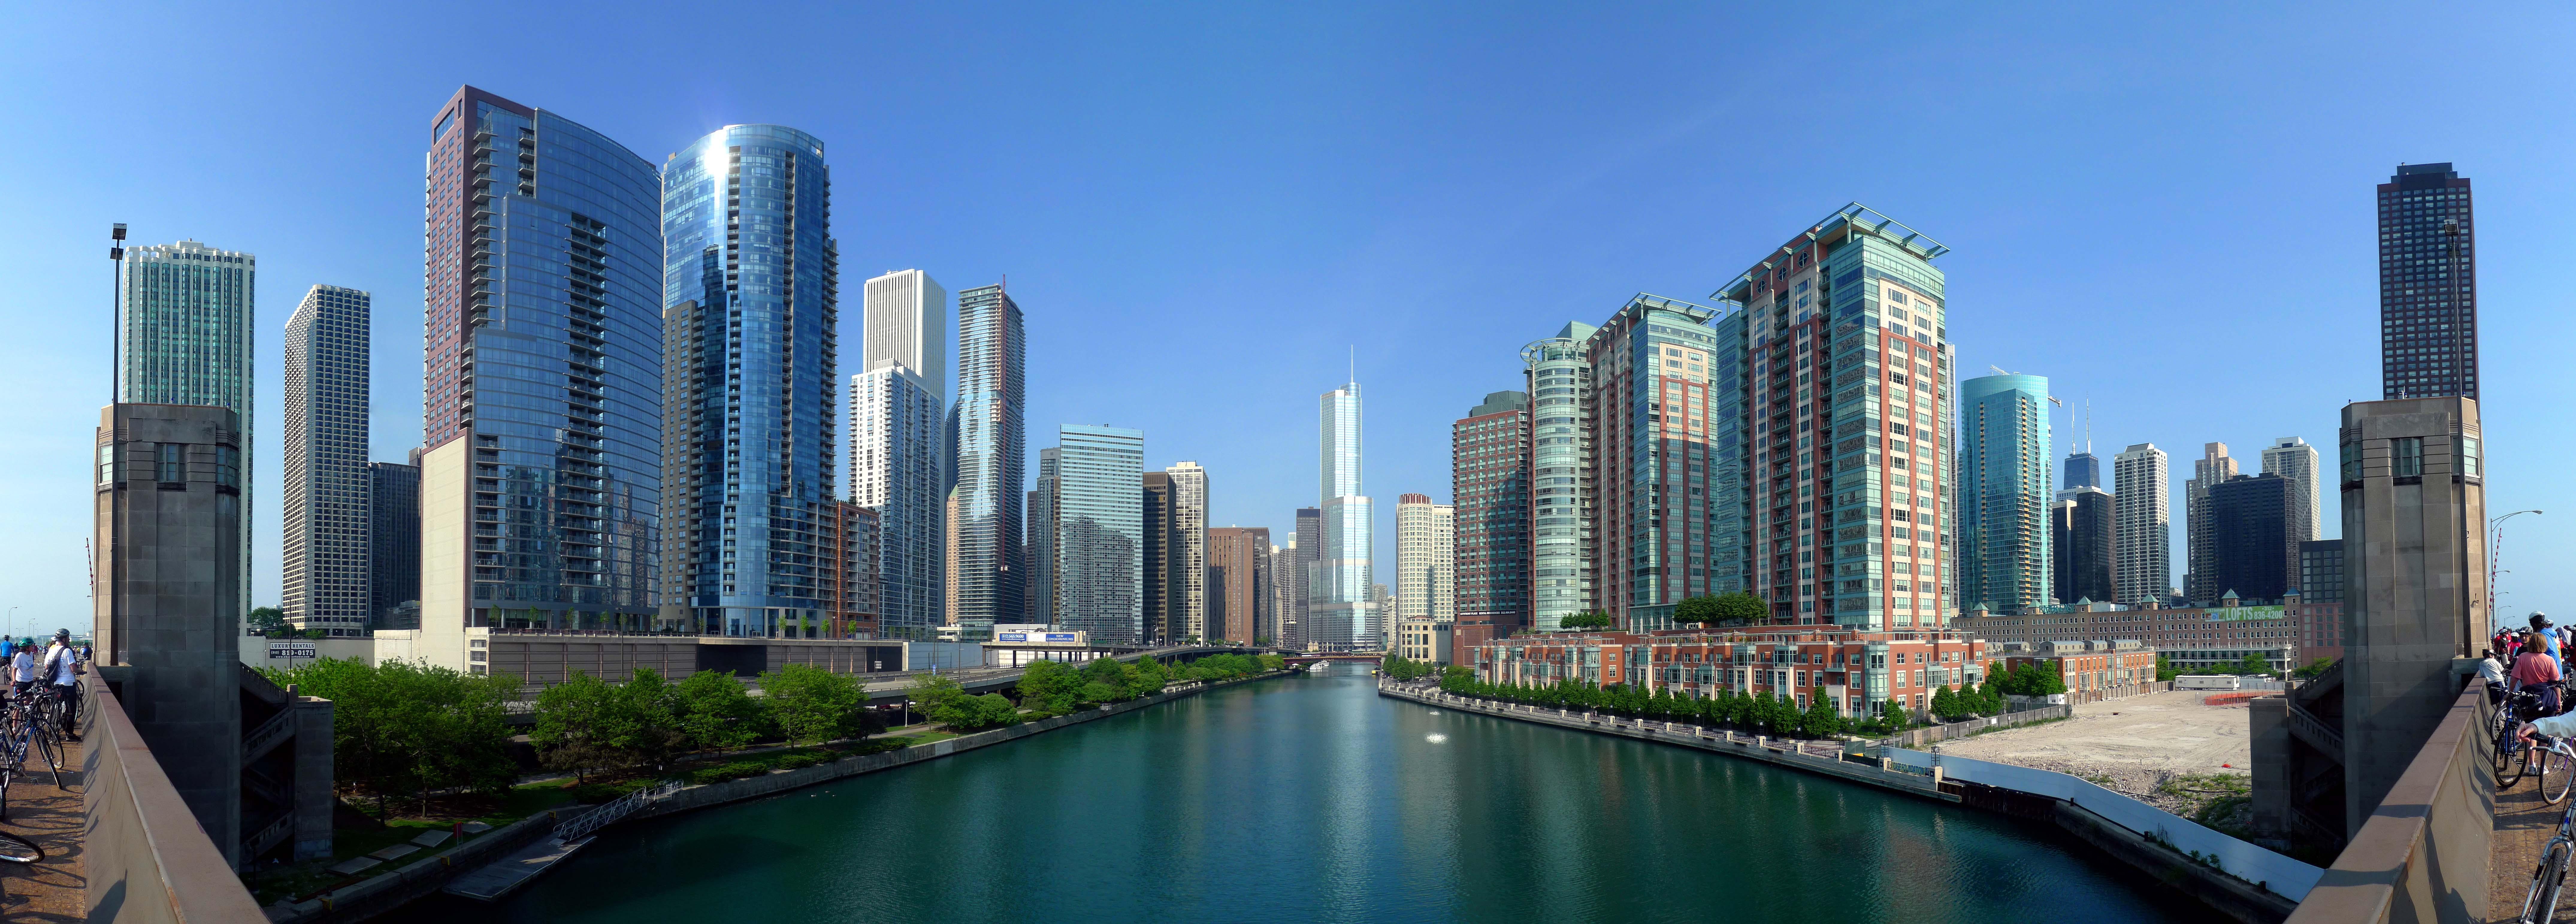 A panoramic view of the Chicago River from Lake Shore Drive, with Trump Tower at its center. (David B. Gleason / Flickr)